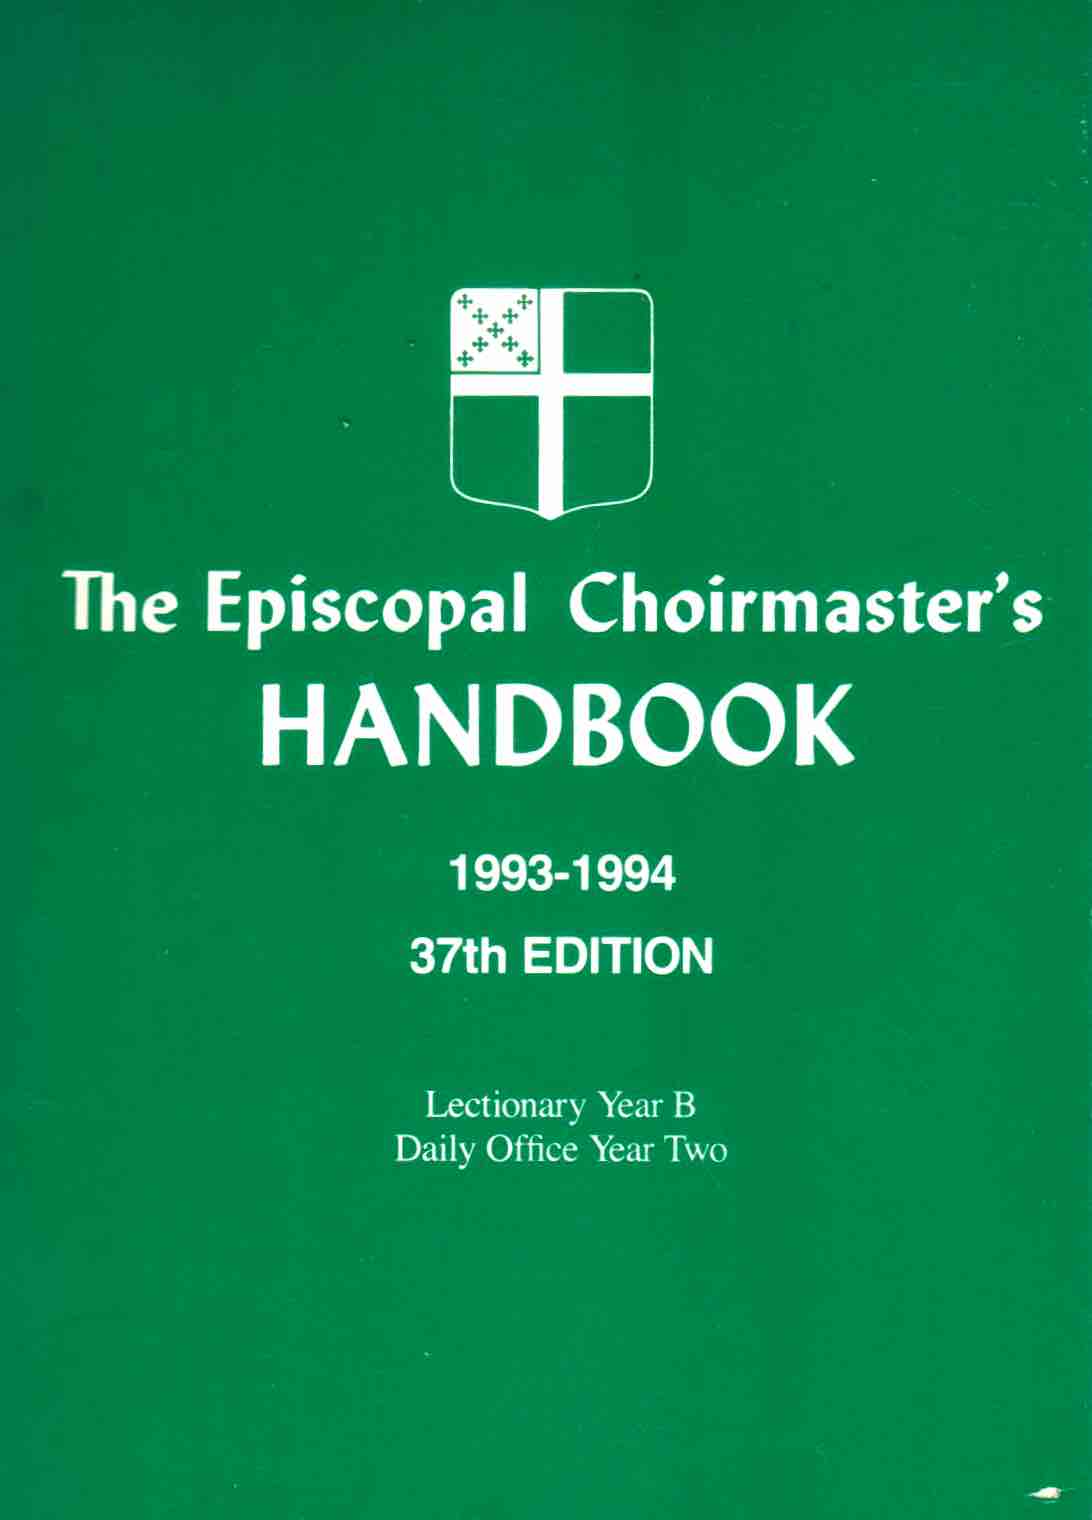 Cover of The Episcopal Choirmaster's Handbook